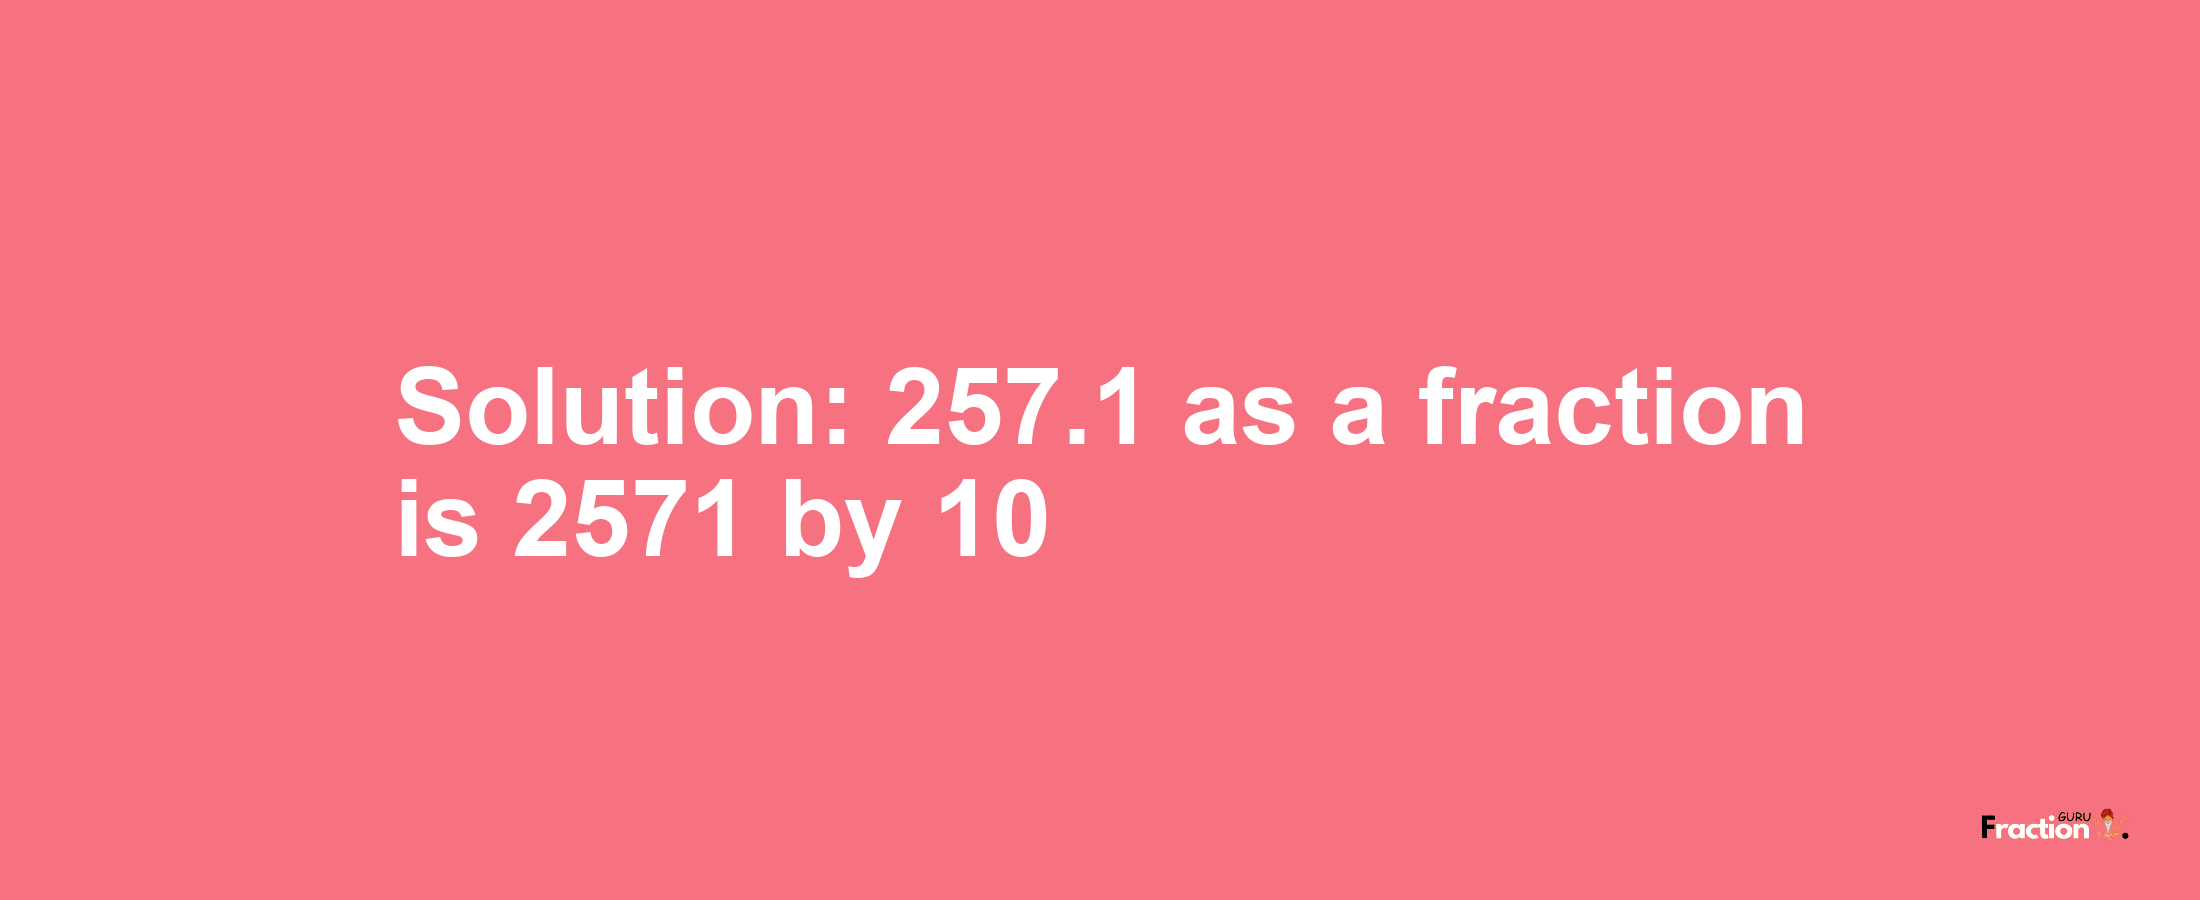 Solution:257.1 as a fraction is 2571/10